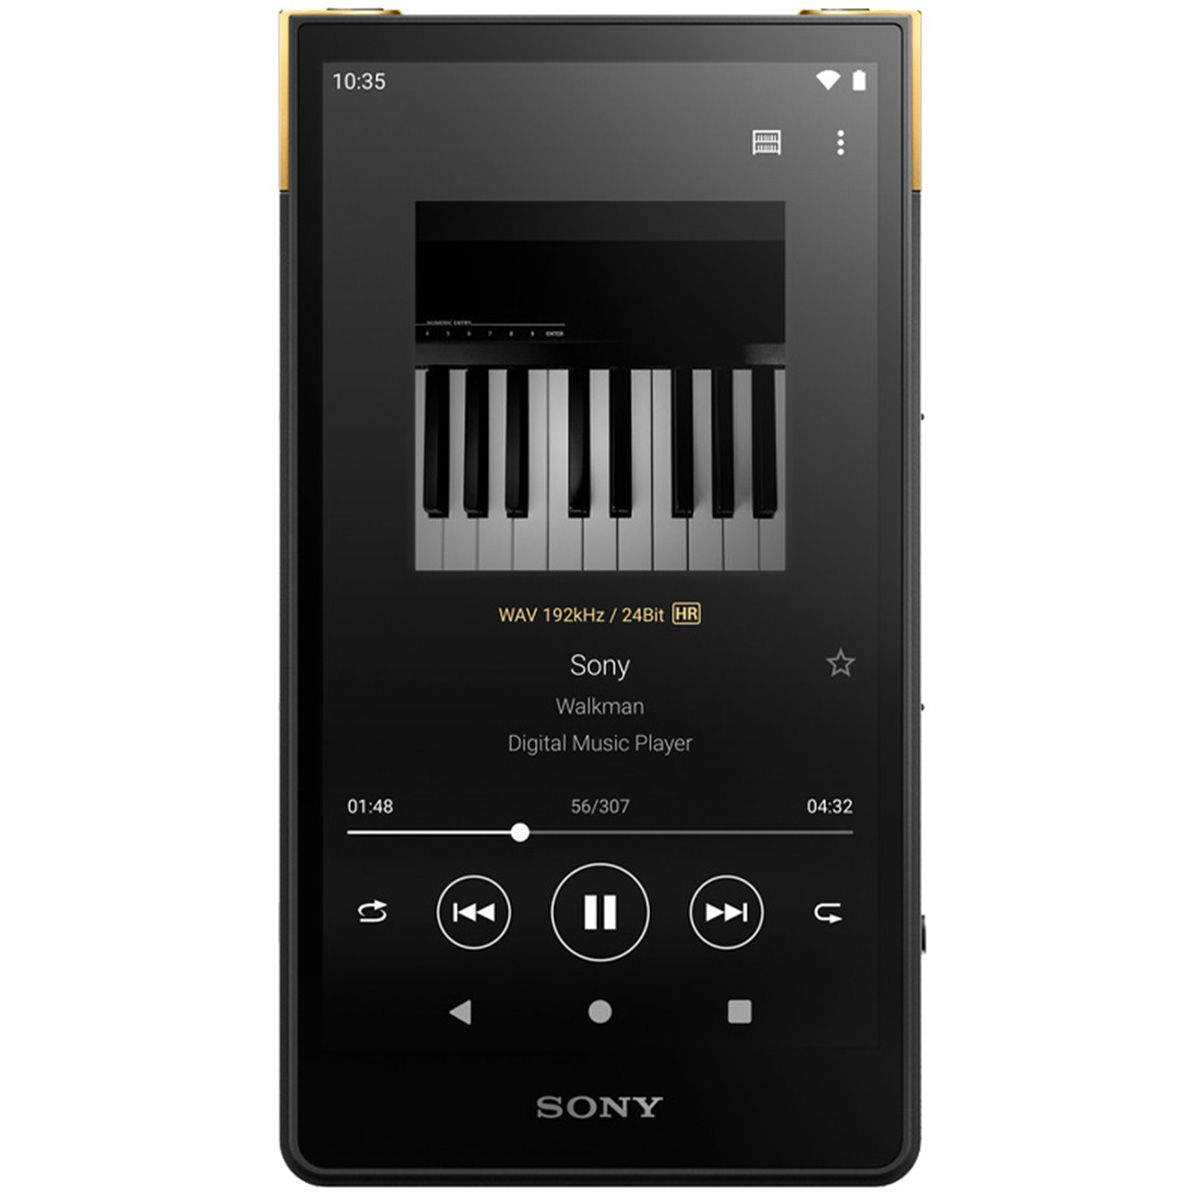 Sony NW-ZX707 Digital Media Player front view with playback screen